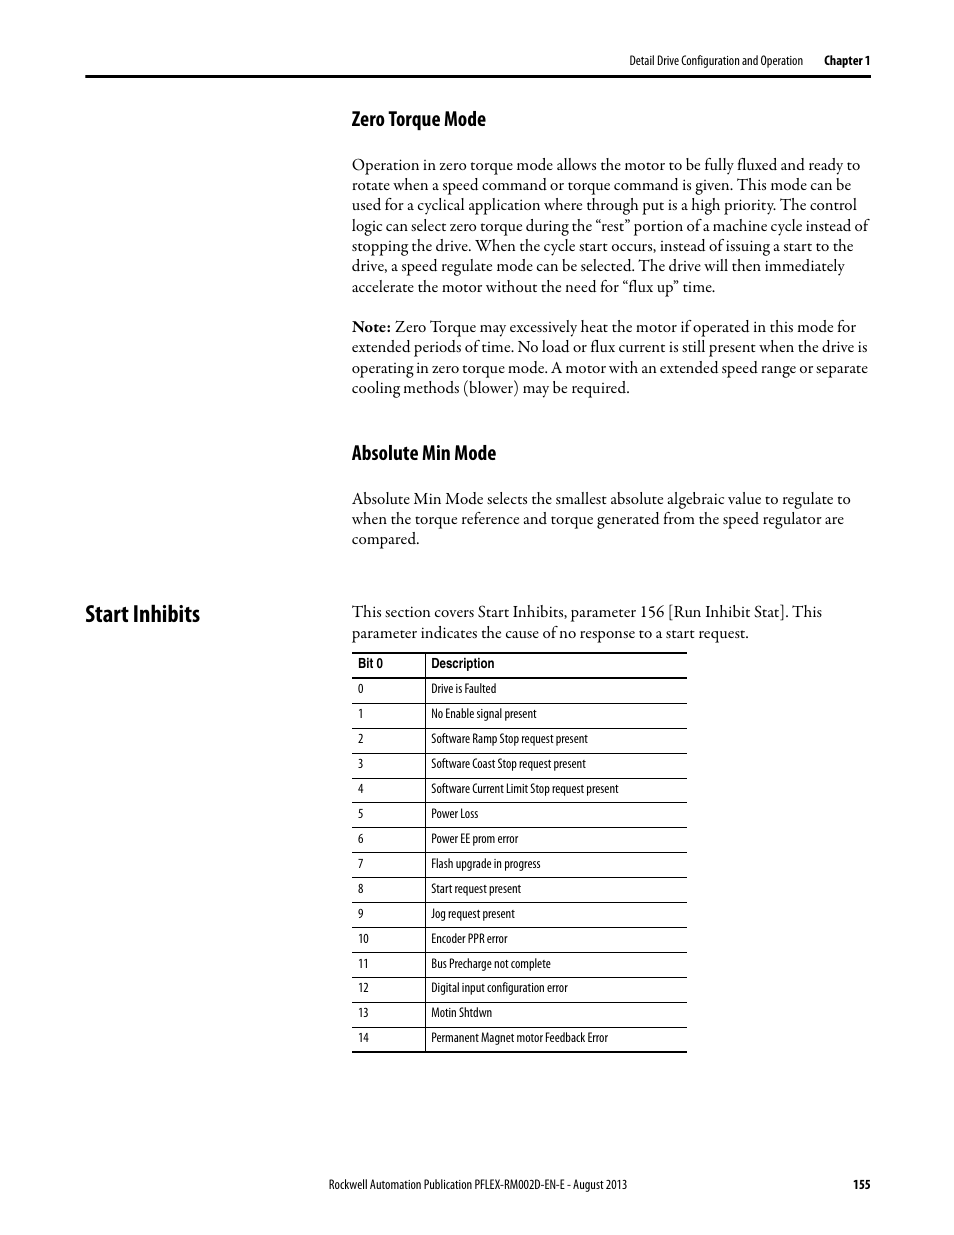 Zero torque mode, Absolute min mode, Start inhibits | Zero torque mode absolute min mode | Rockwell Automation 20D PowerFlex 700S with Phase I Control Reference Manual User Manual | Page 155 / 190